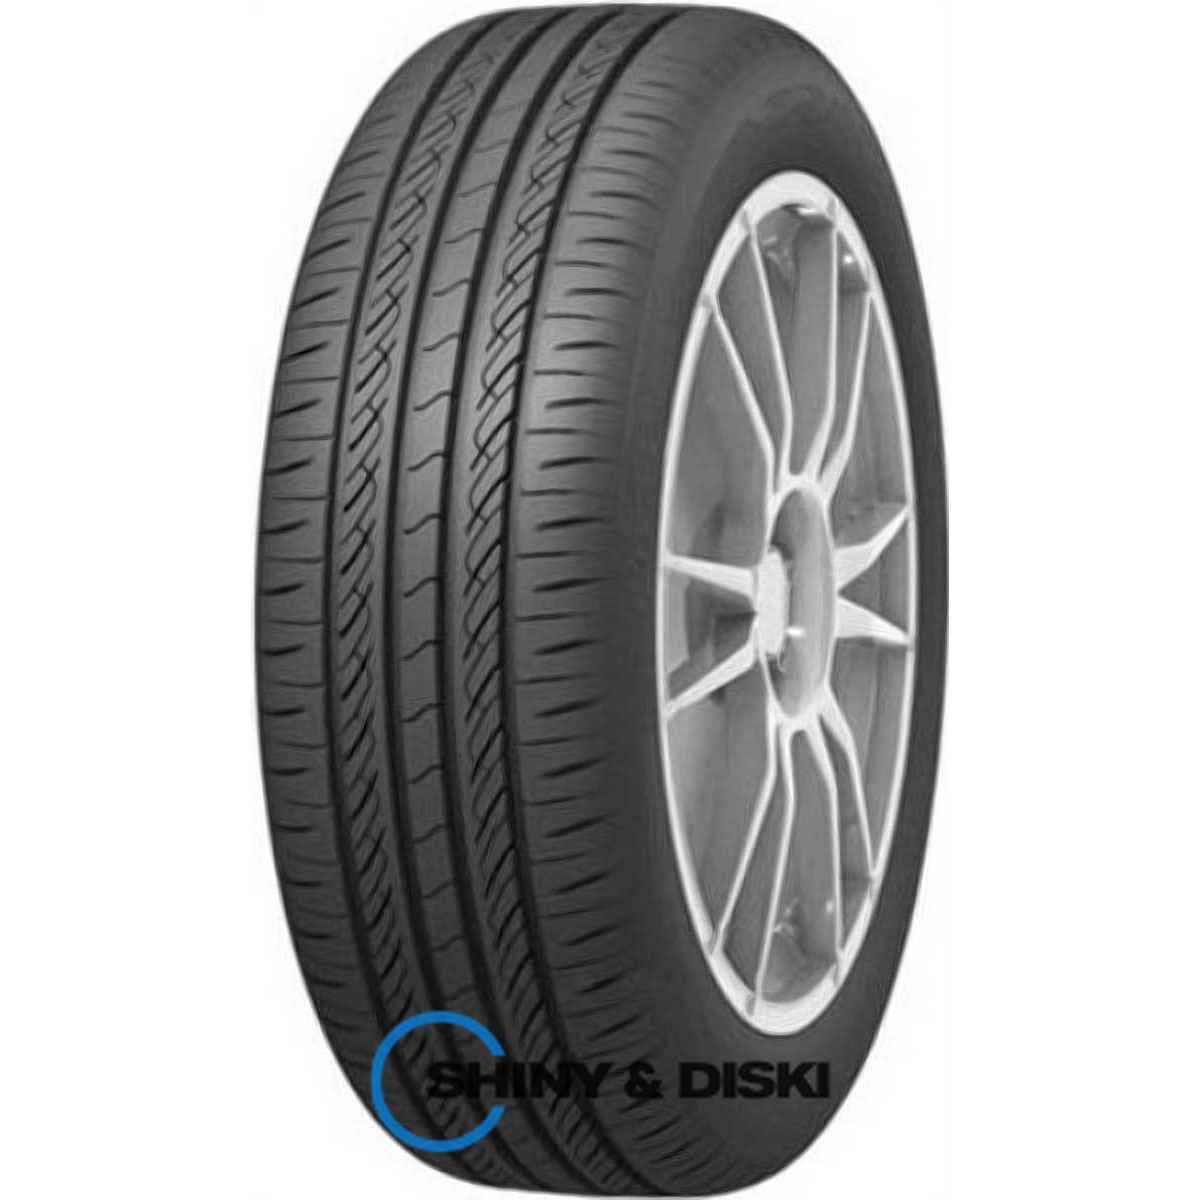 infinity ecosis 185/65 r15 92t